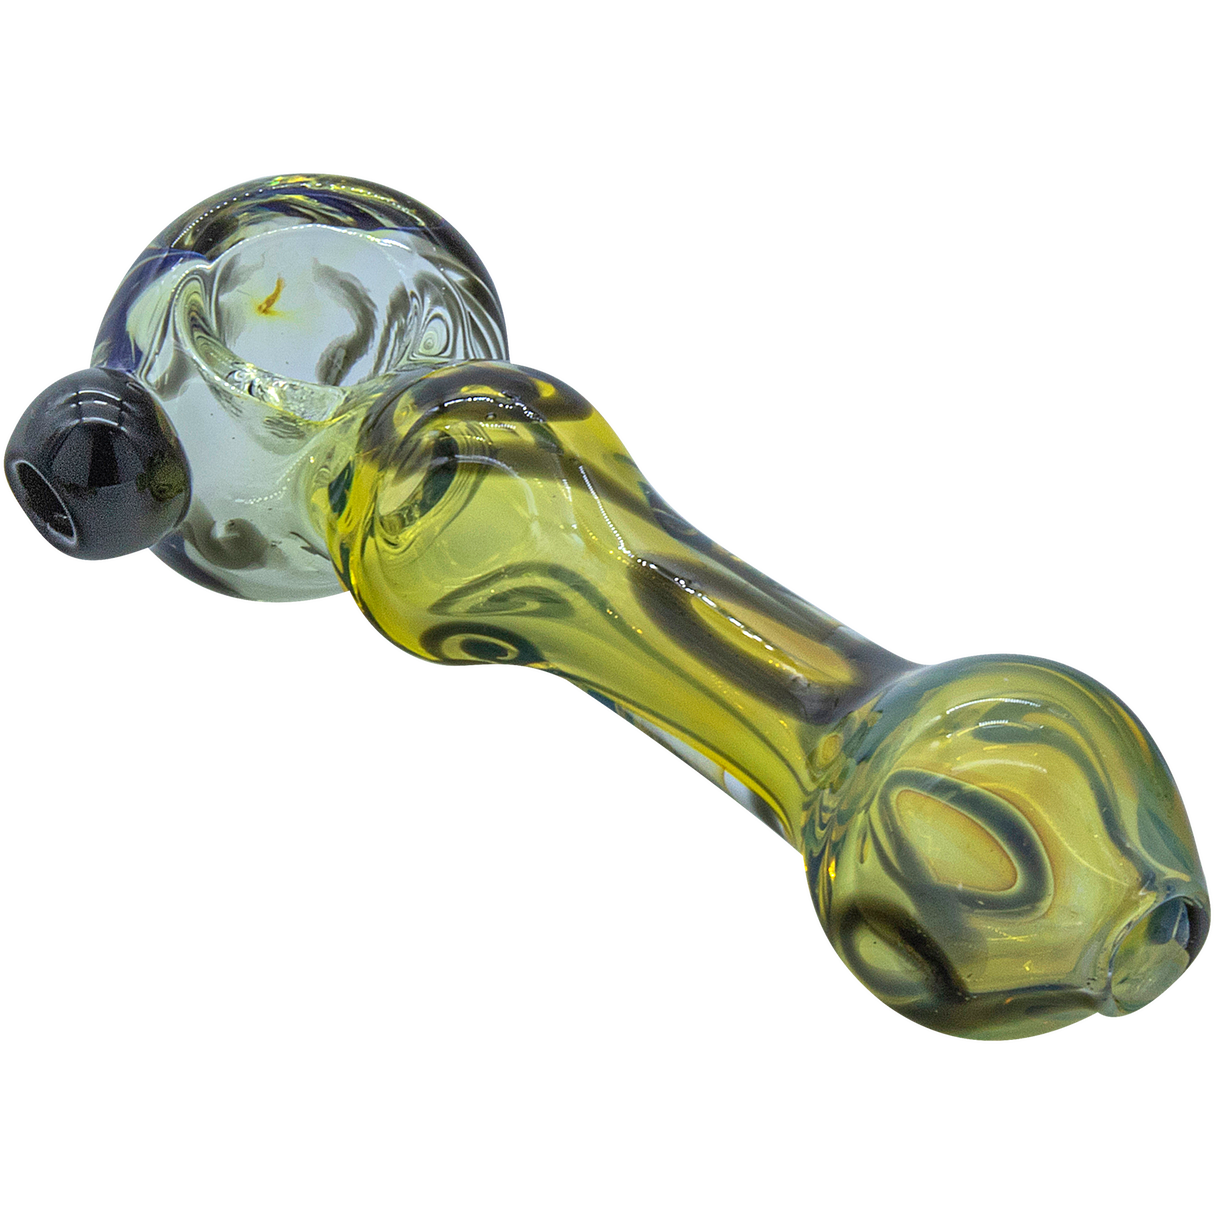 LA Pipes "Painted Warrior Spoon" Glass Pipe in Onyx Black, Fumed Color Changing Design